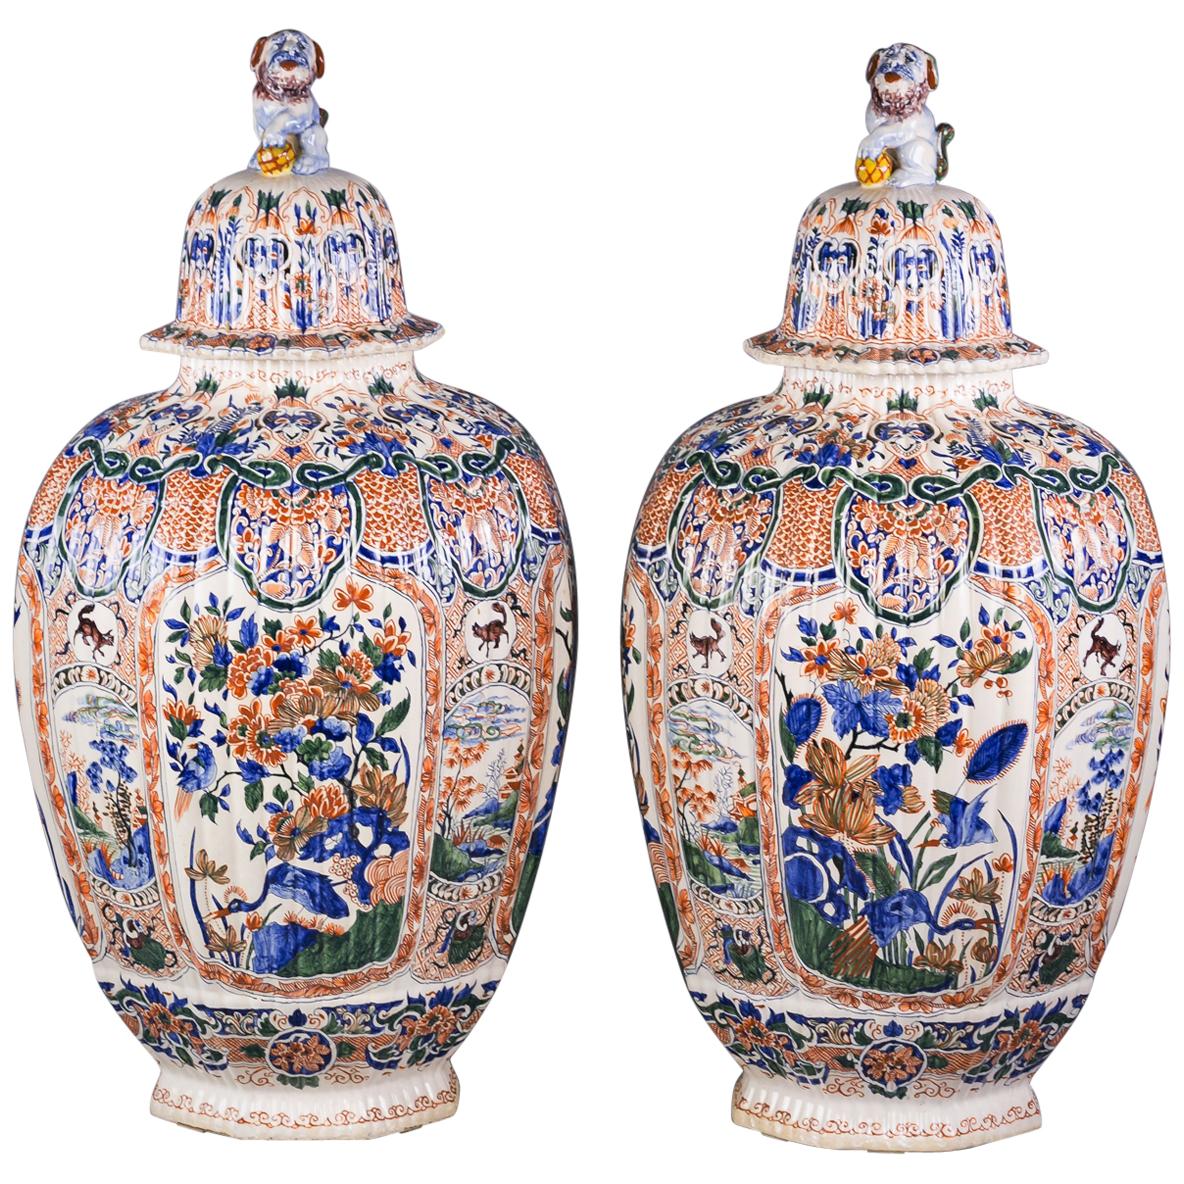 Pair of Monumental Delft Covered Temple Jars, circa 1880